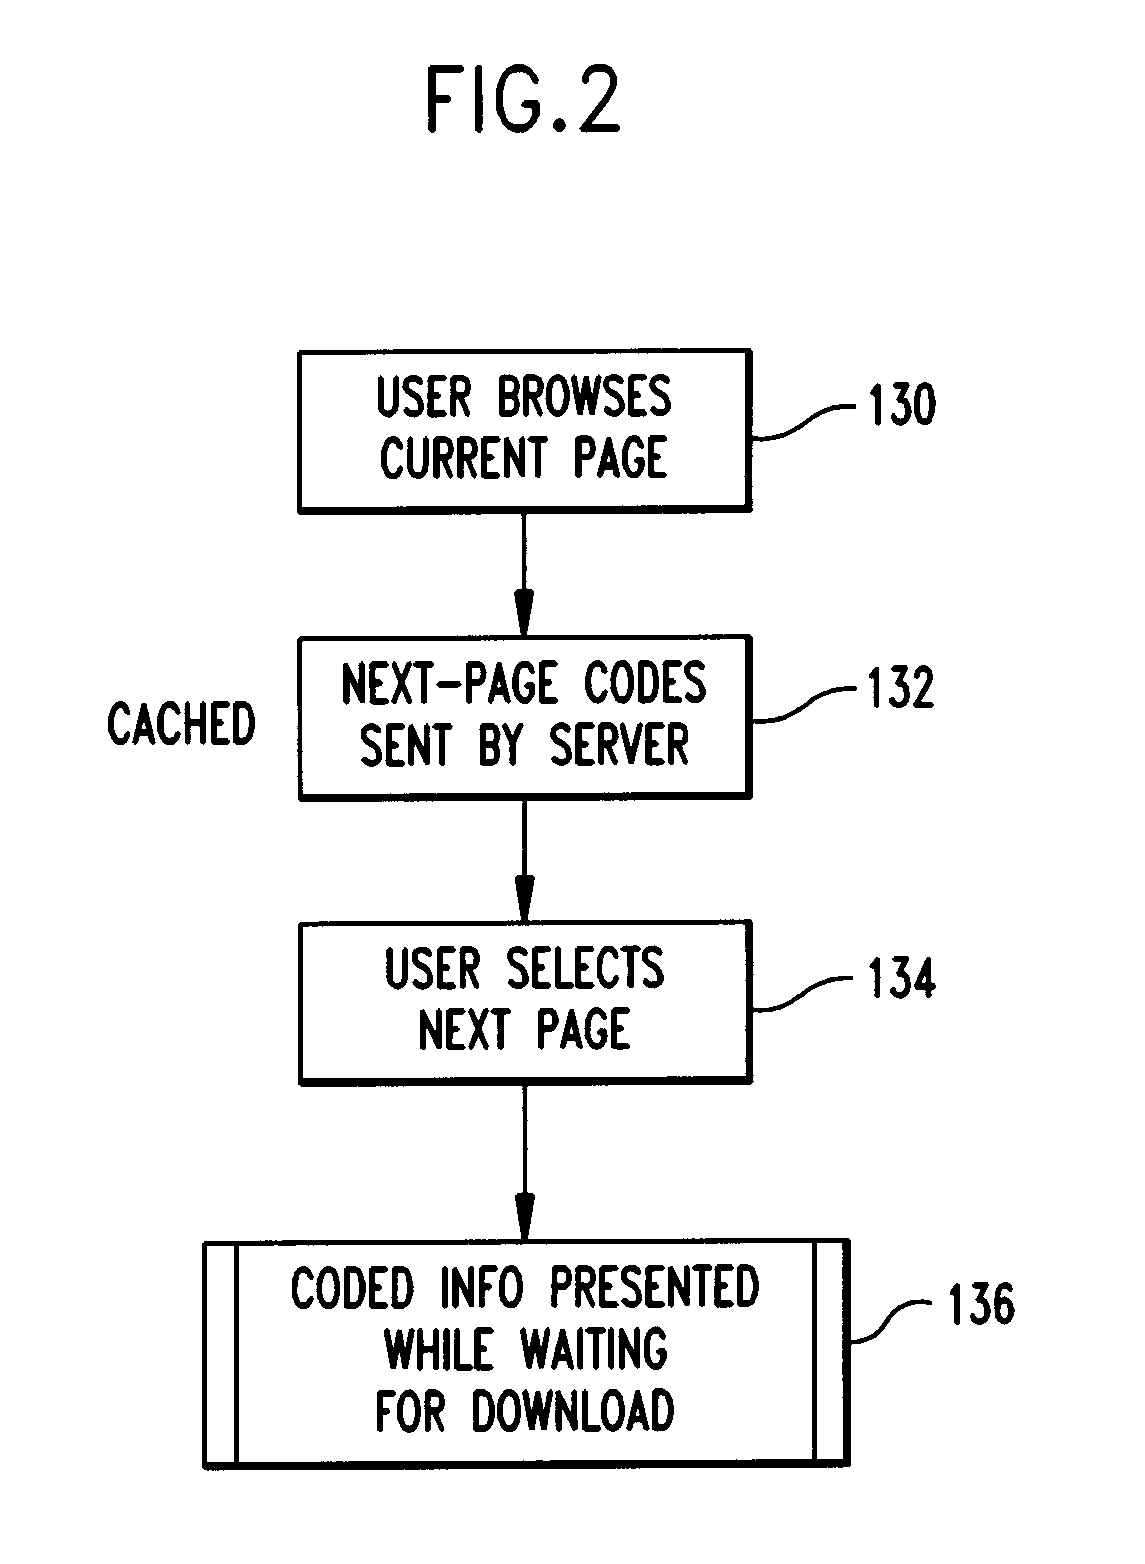 System and method for information transfer over a network